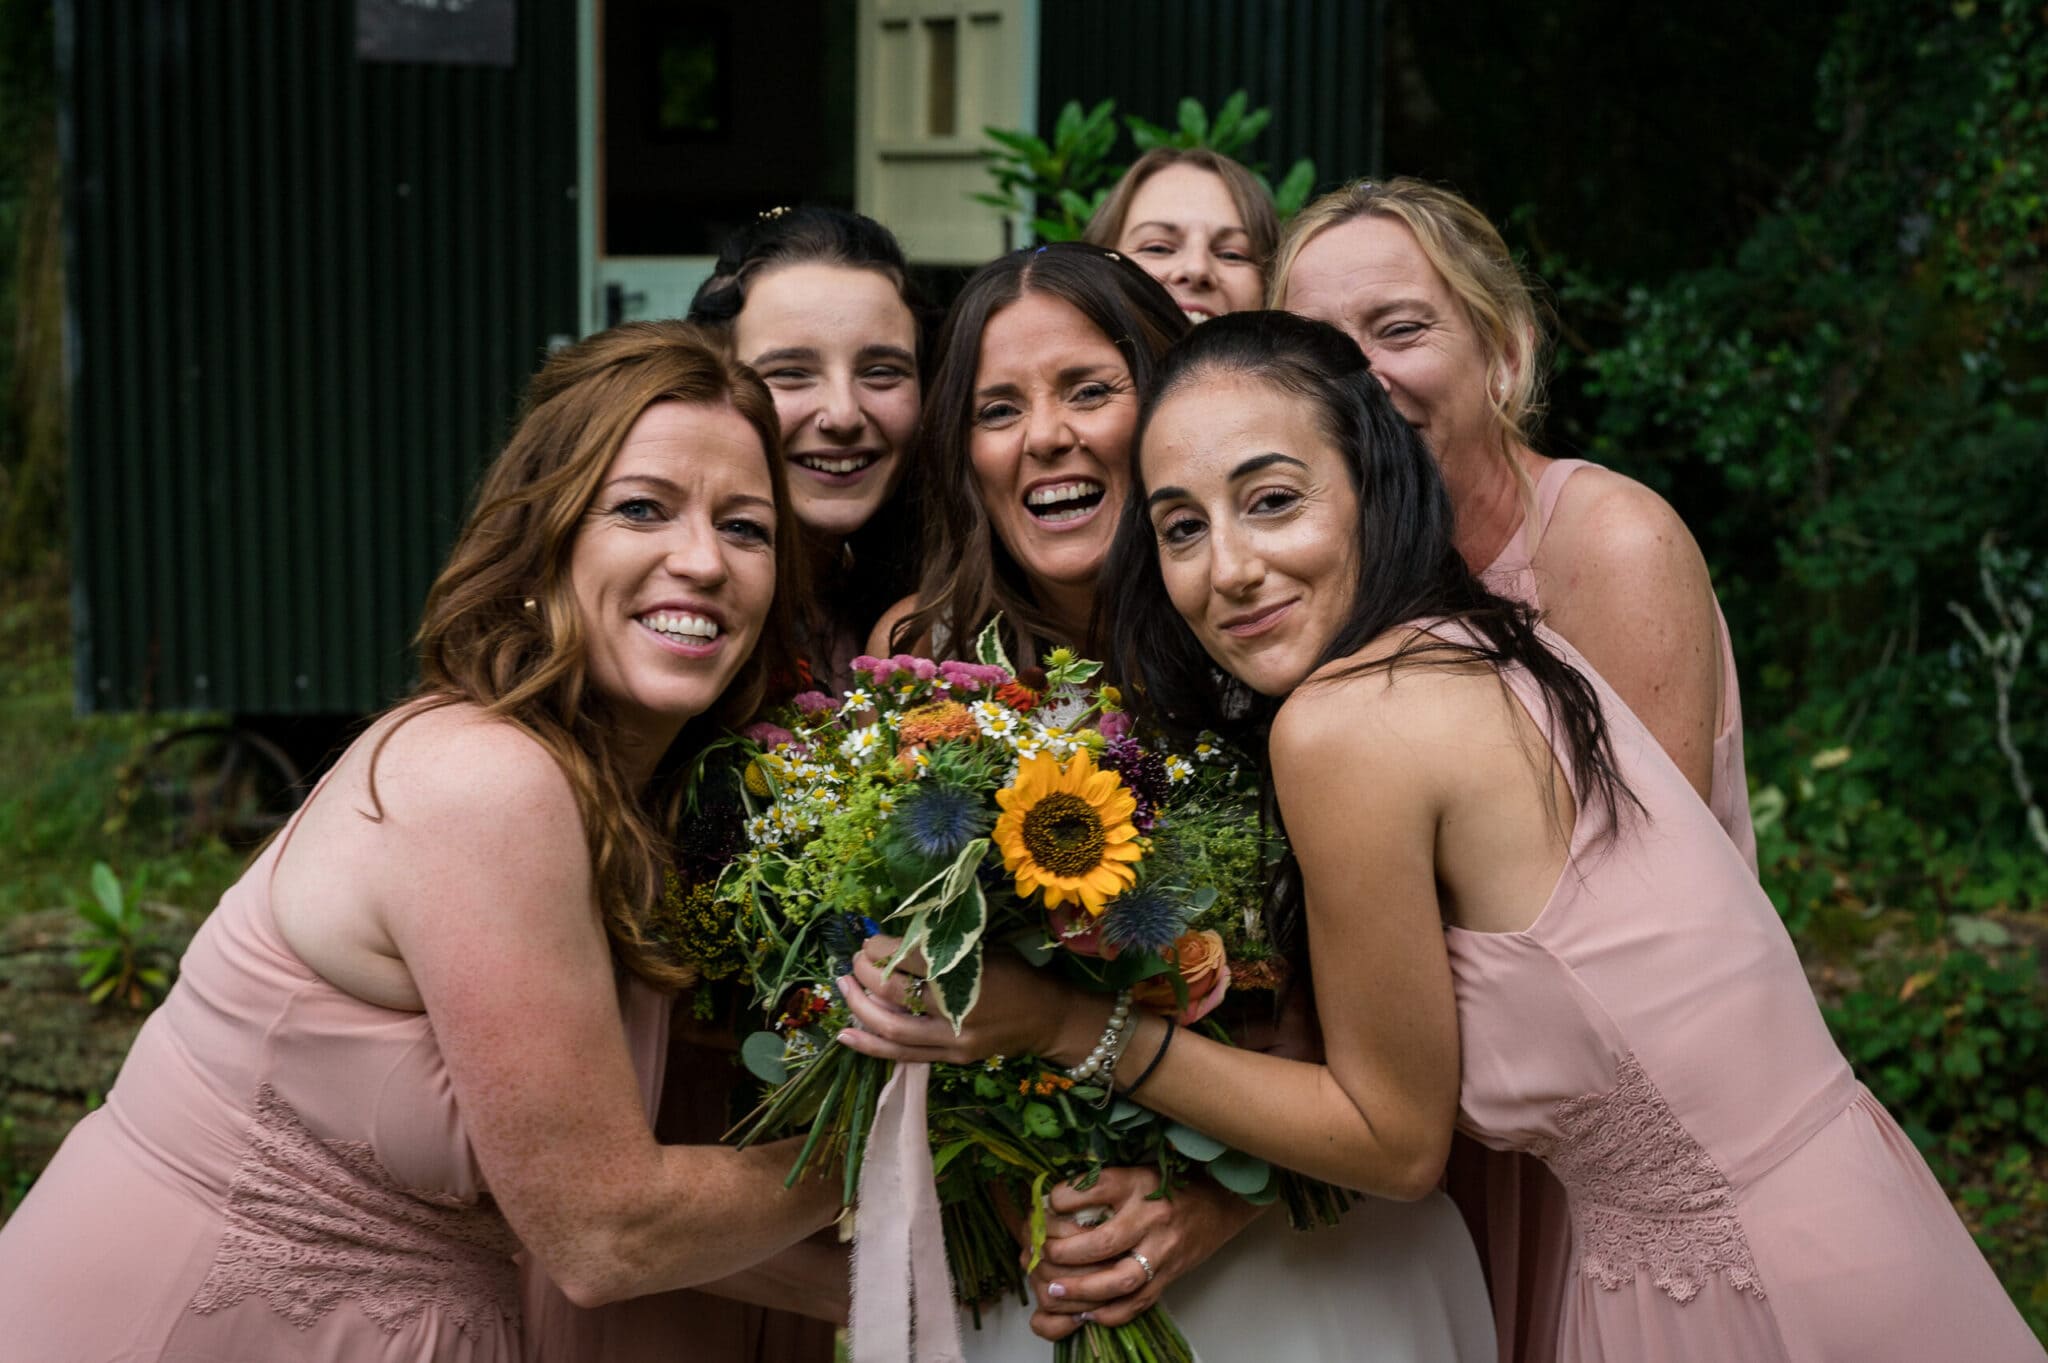 Girls hug together at Weddings in the Wood in the New Forest